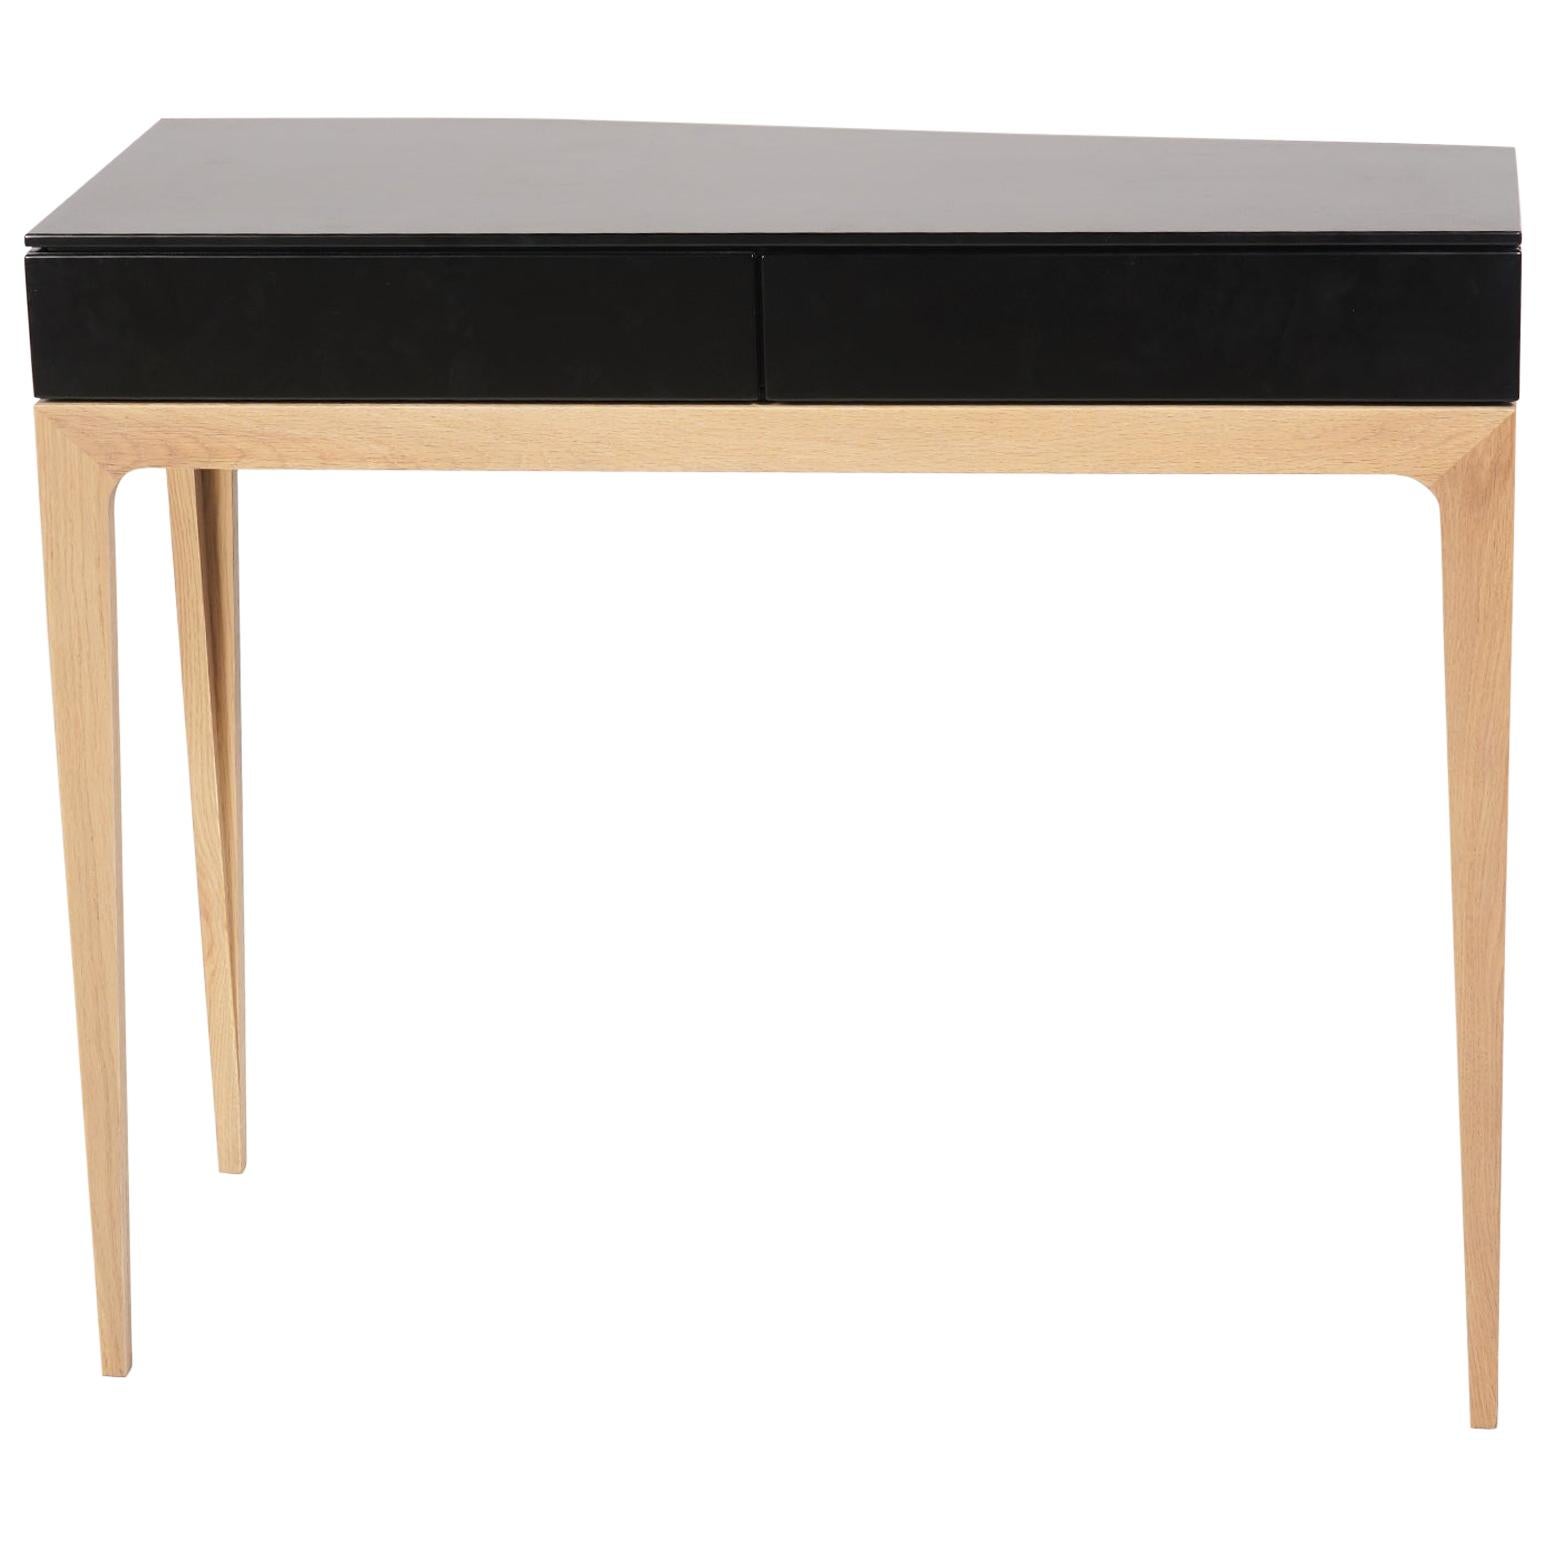 Sandra Demuth for Roche Bobois 'Moved' Console Table 3 Legs